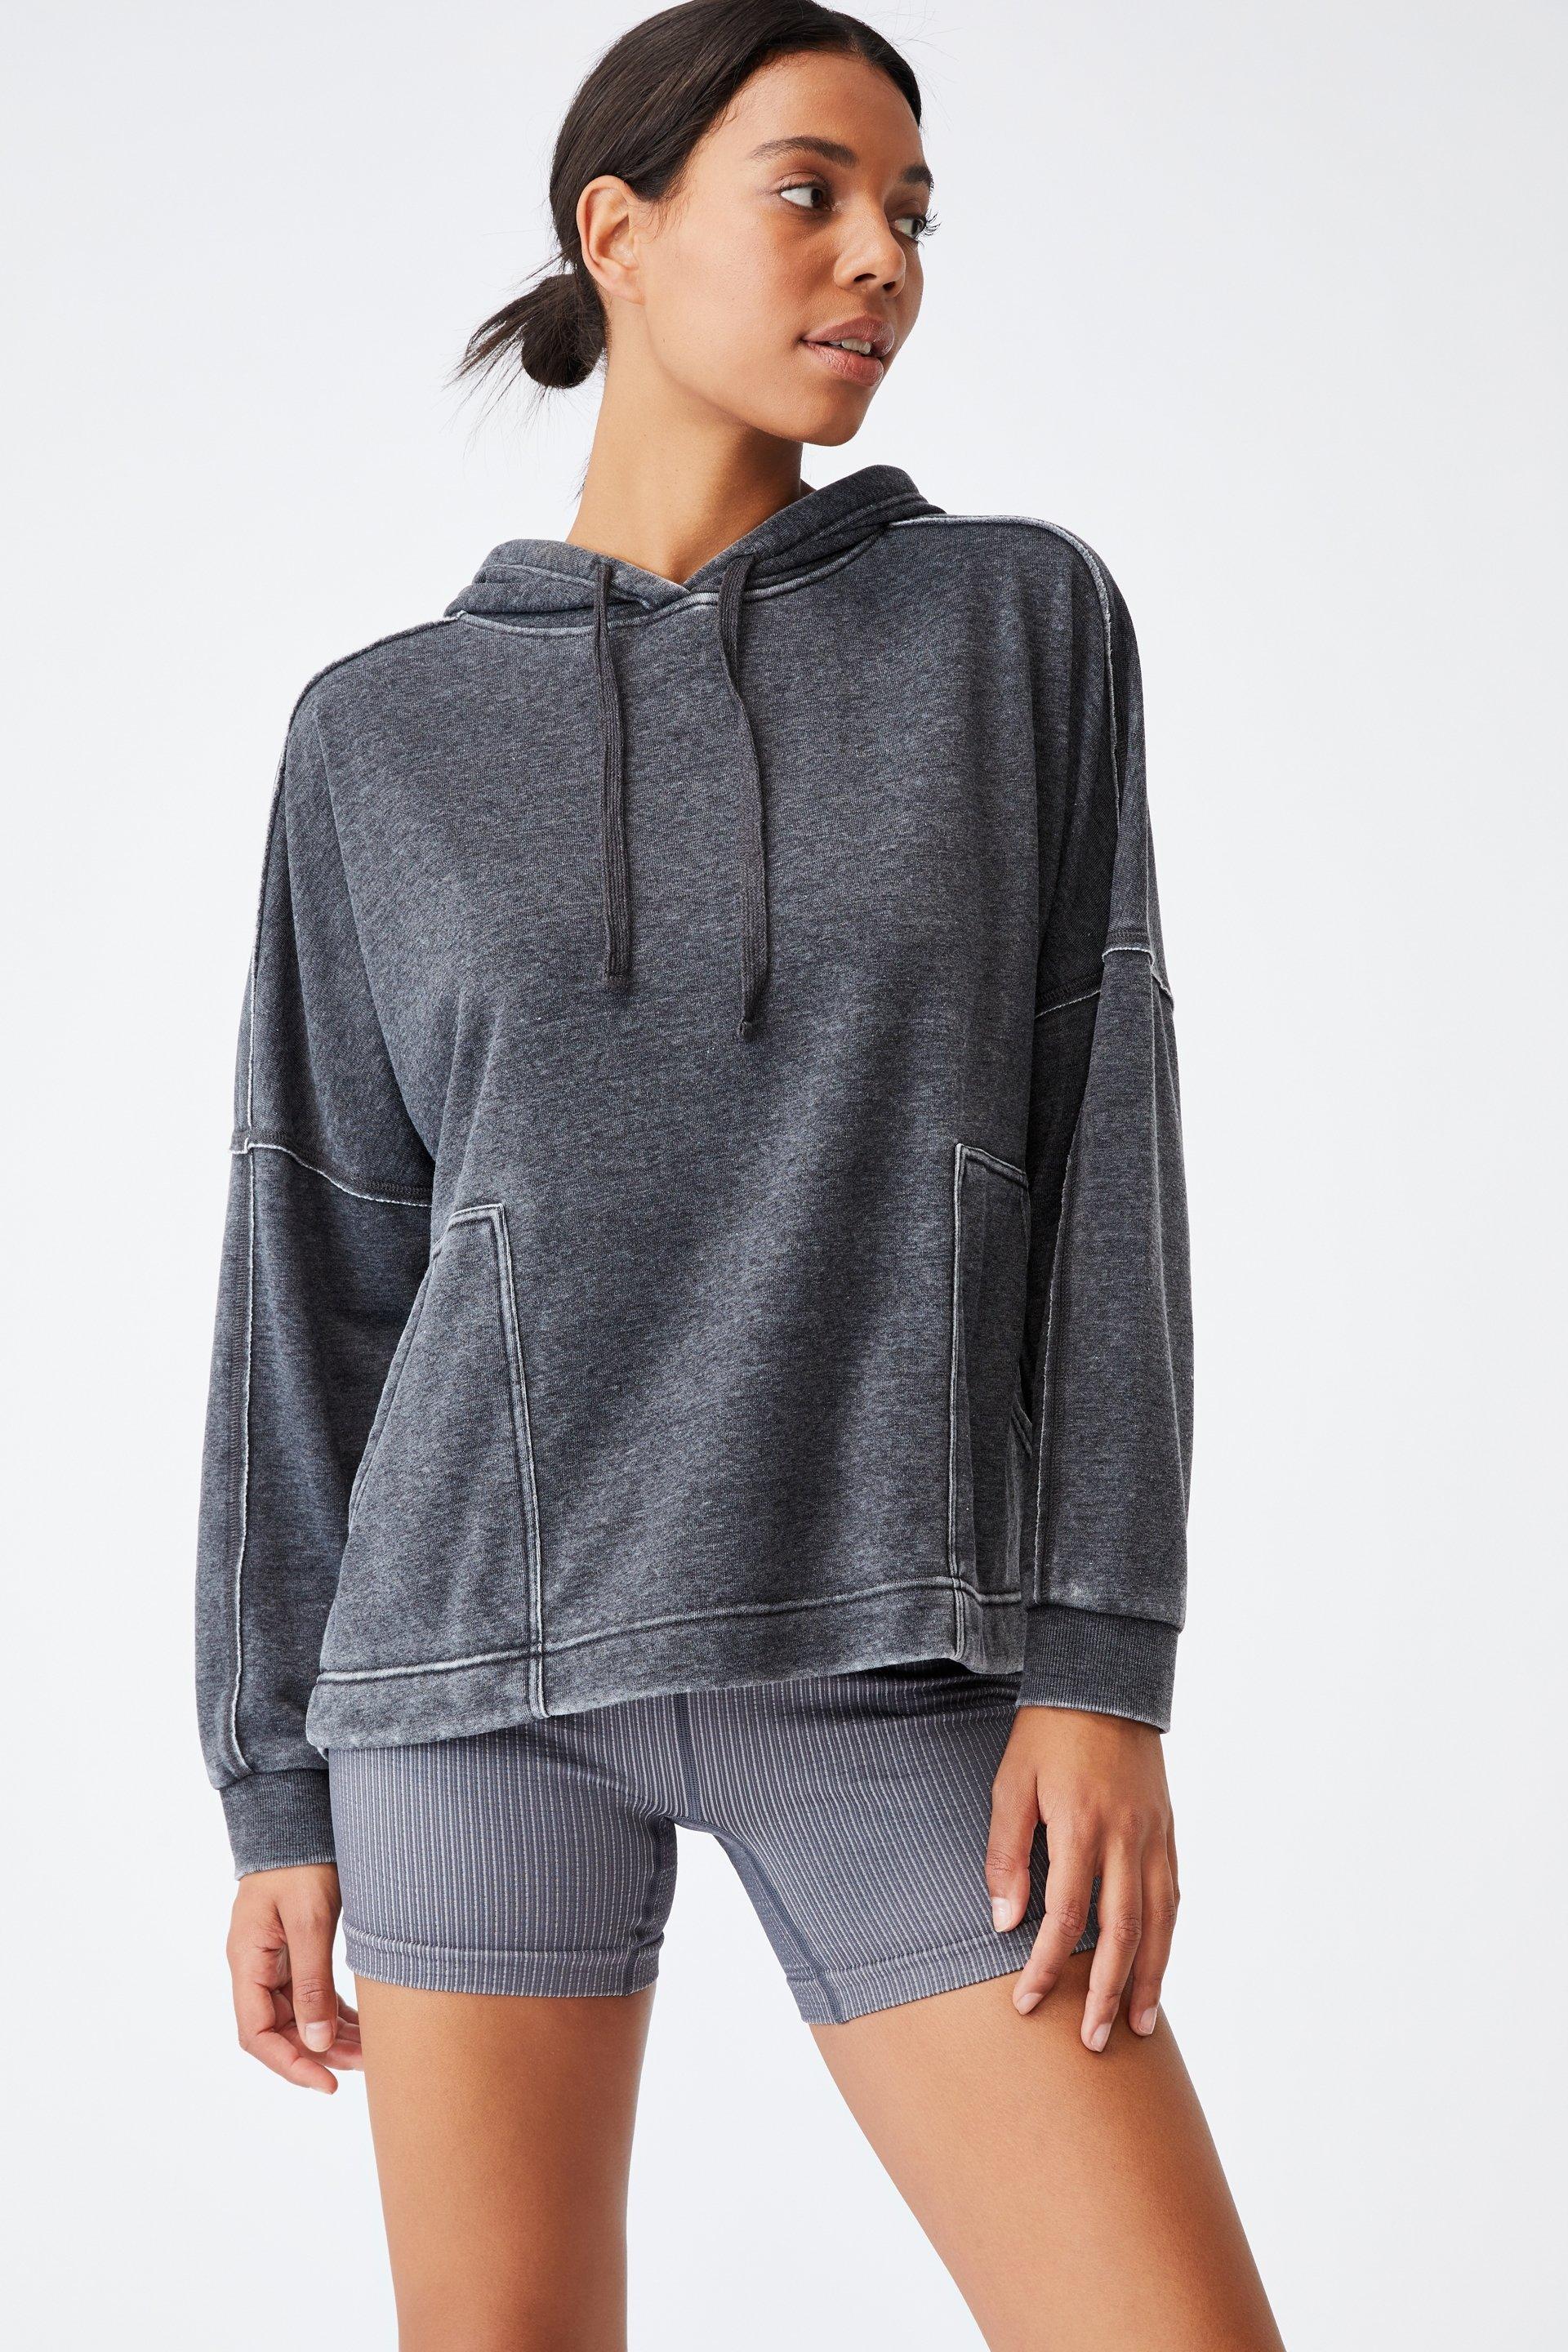 Lifestyle relaxed hoodie - washed black Cotton On Hoodies, Sweats ...